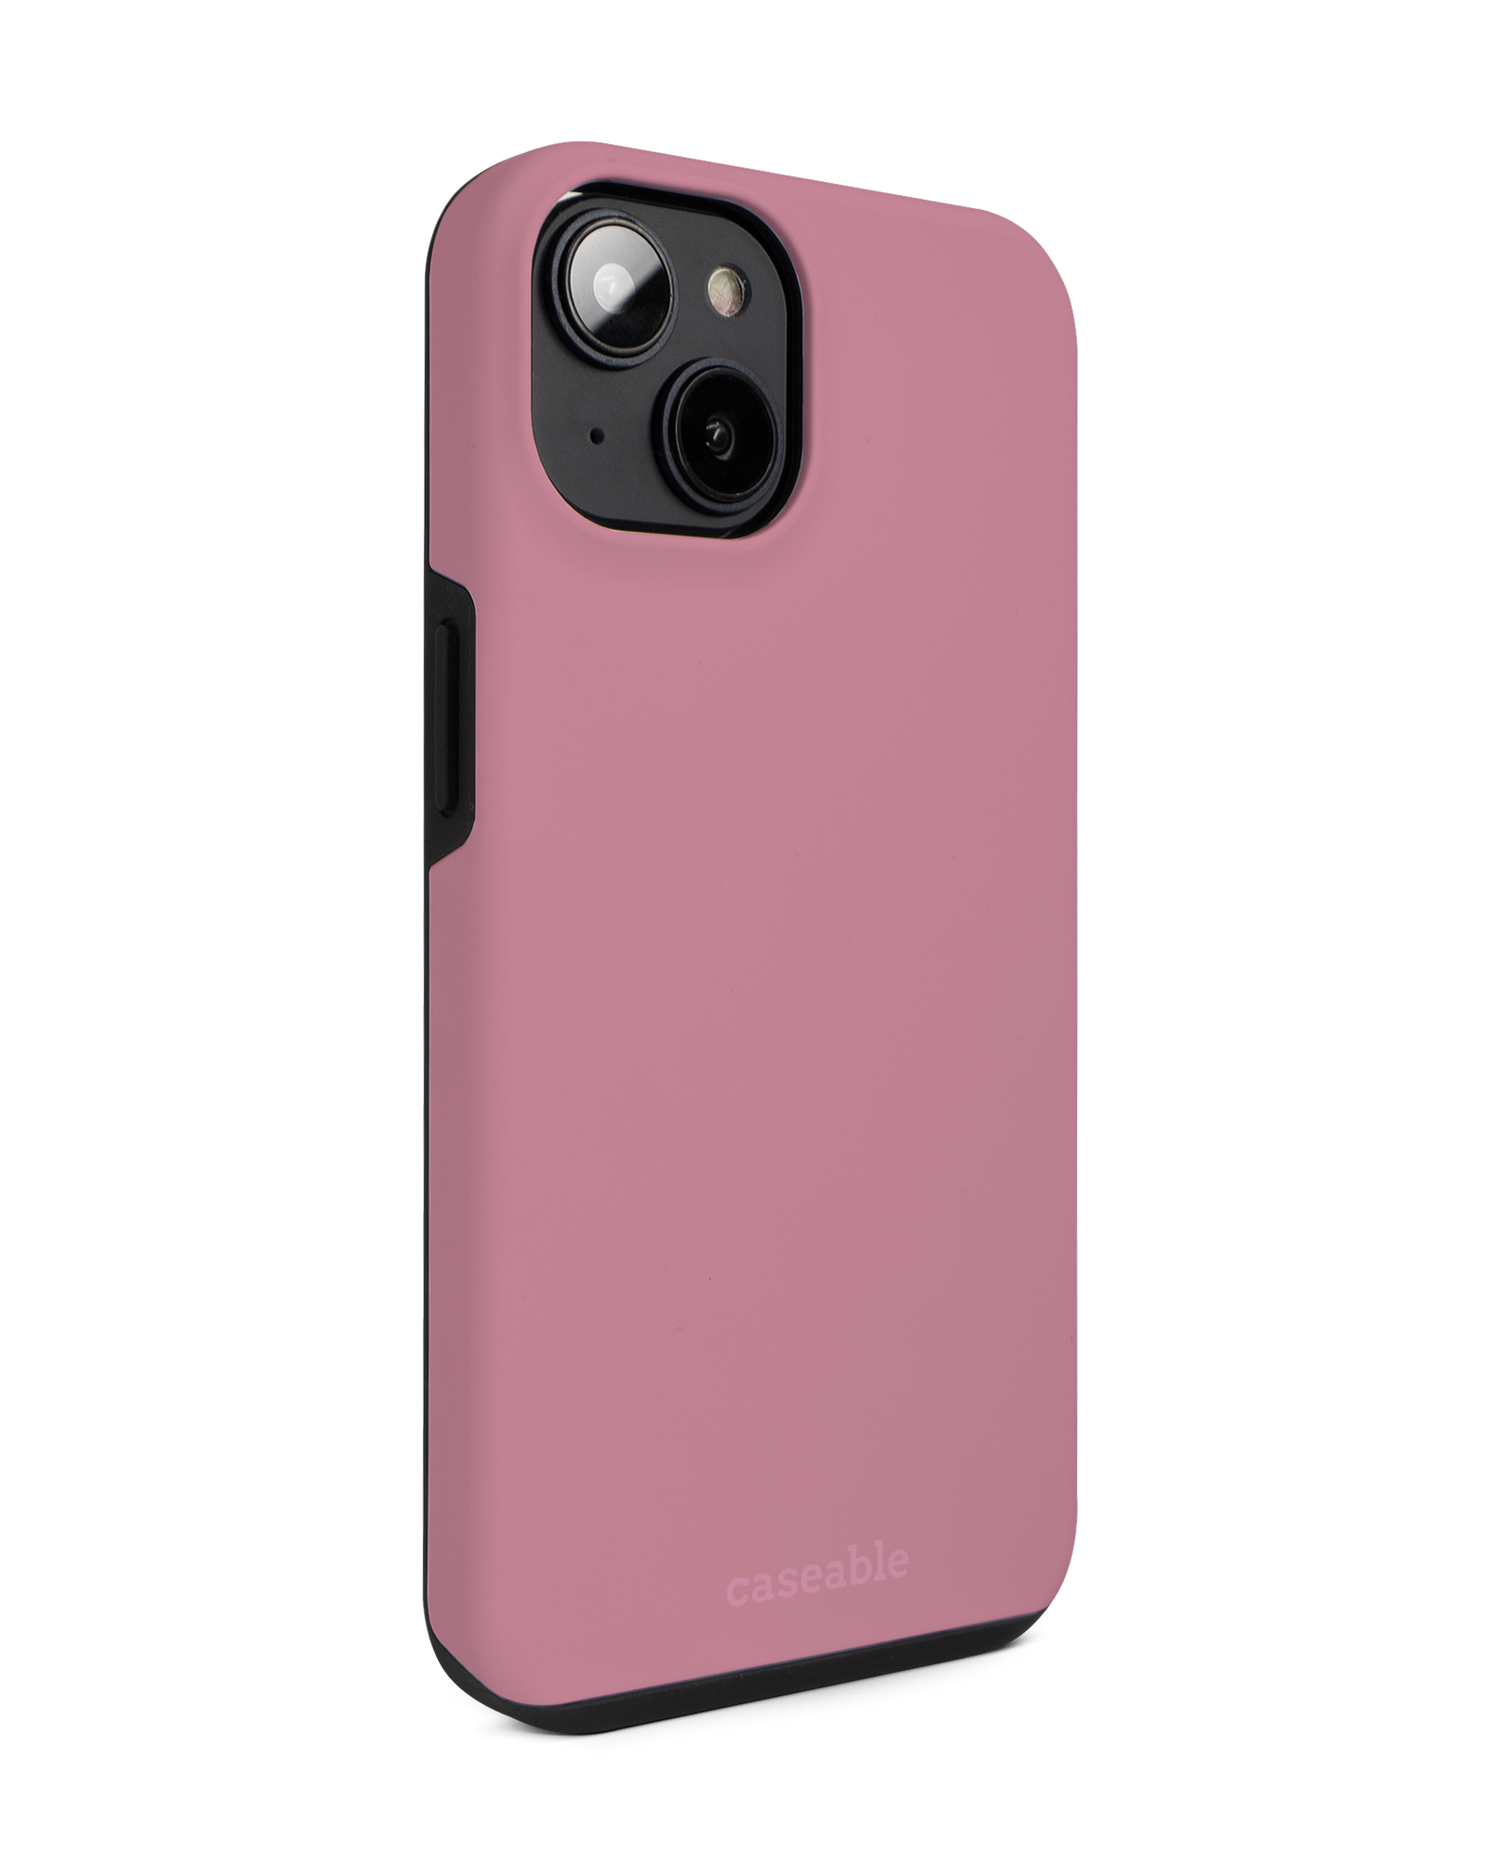 WILD ROSE Premium Phone for Apple iPhone 14: View from the left side